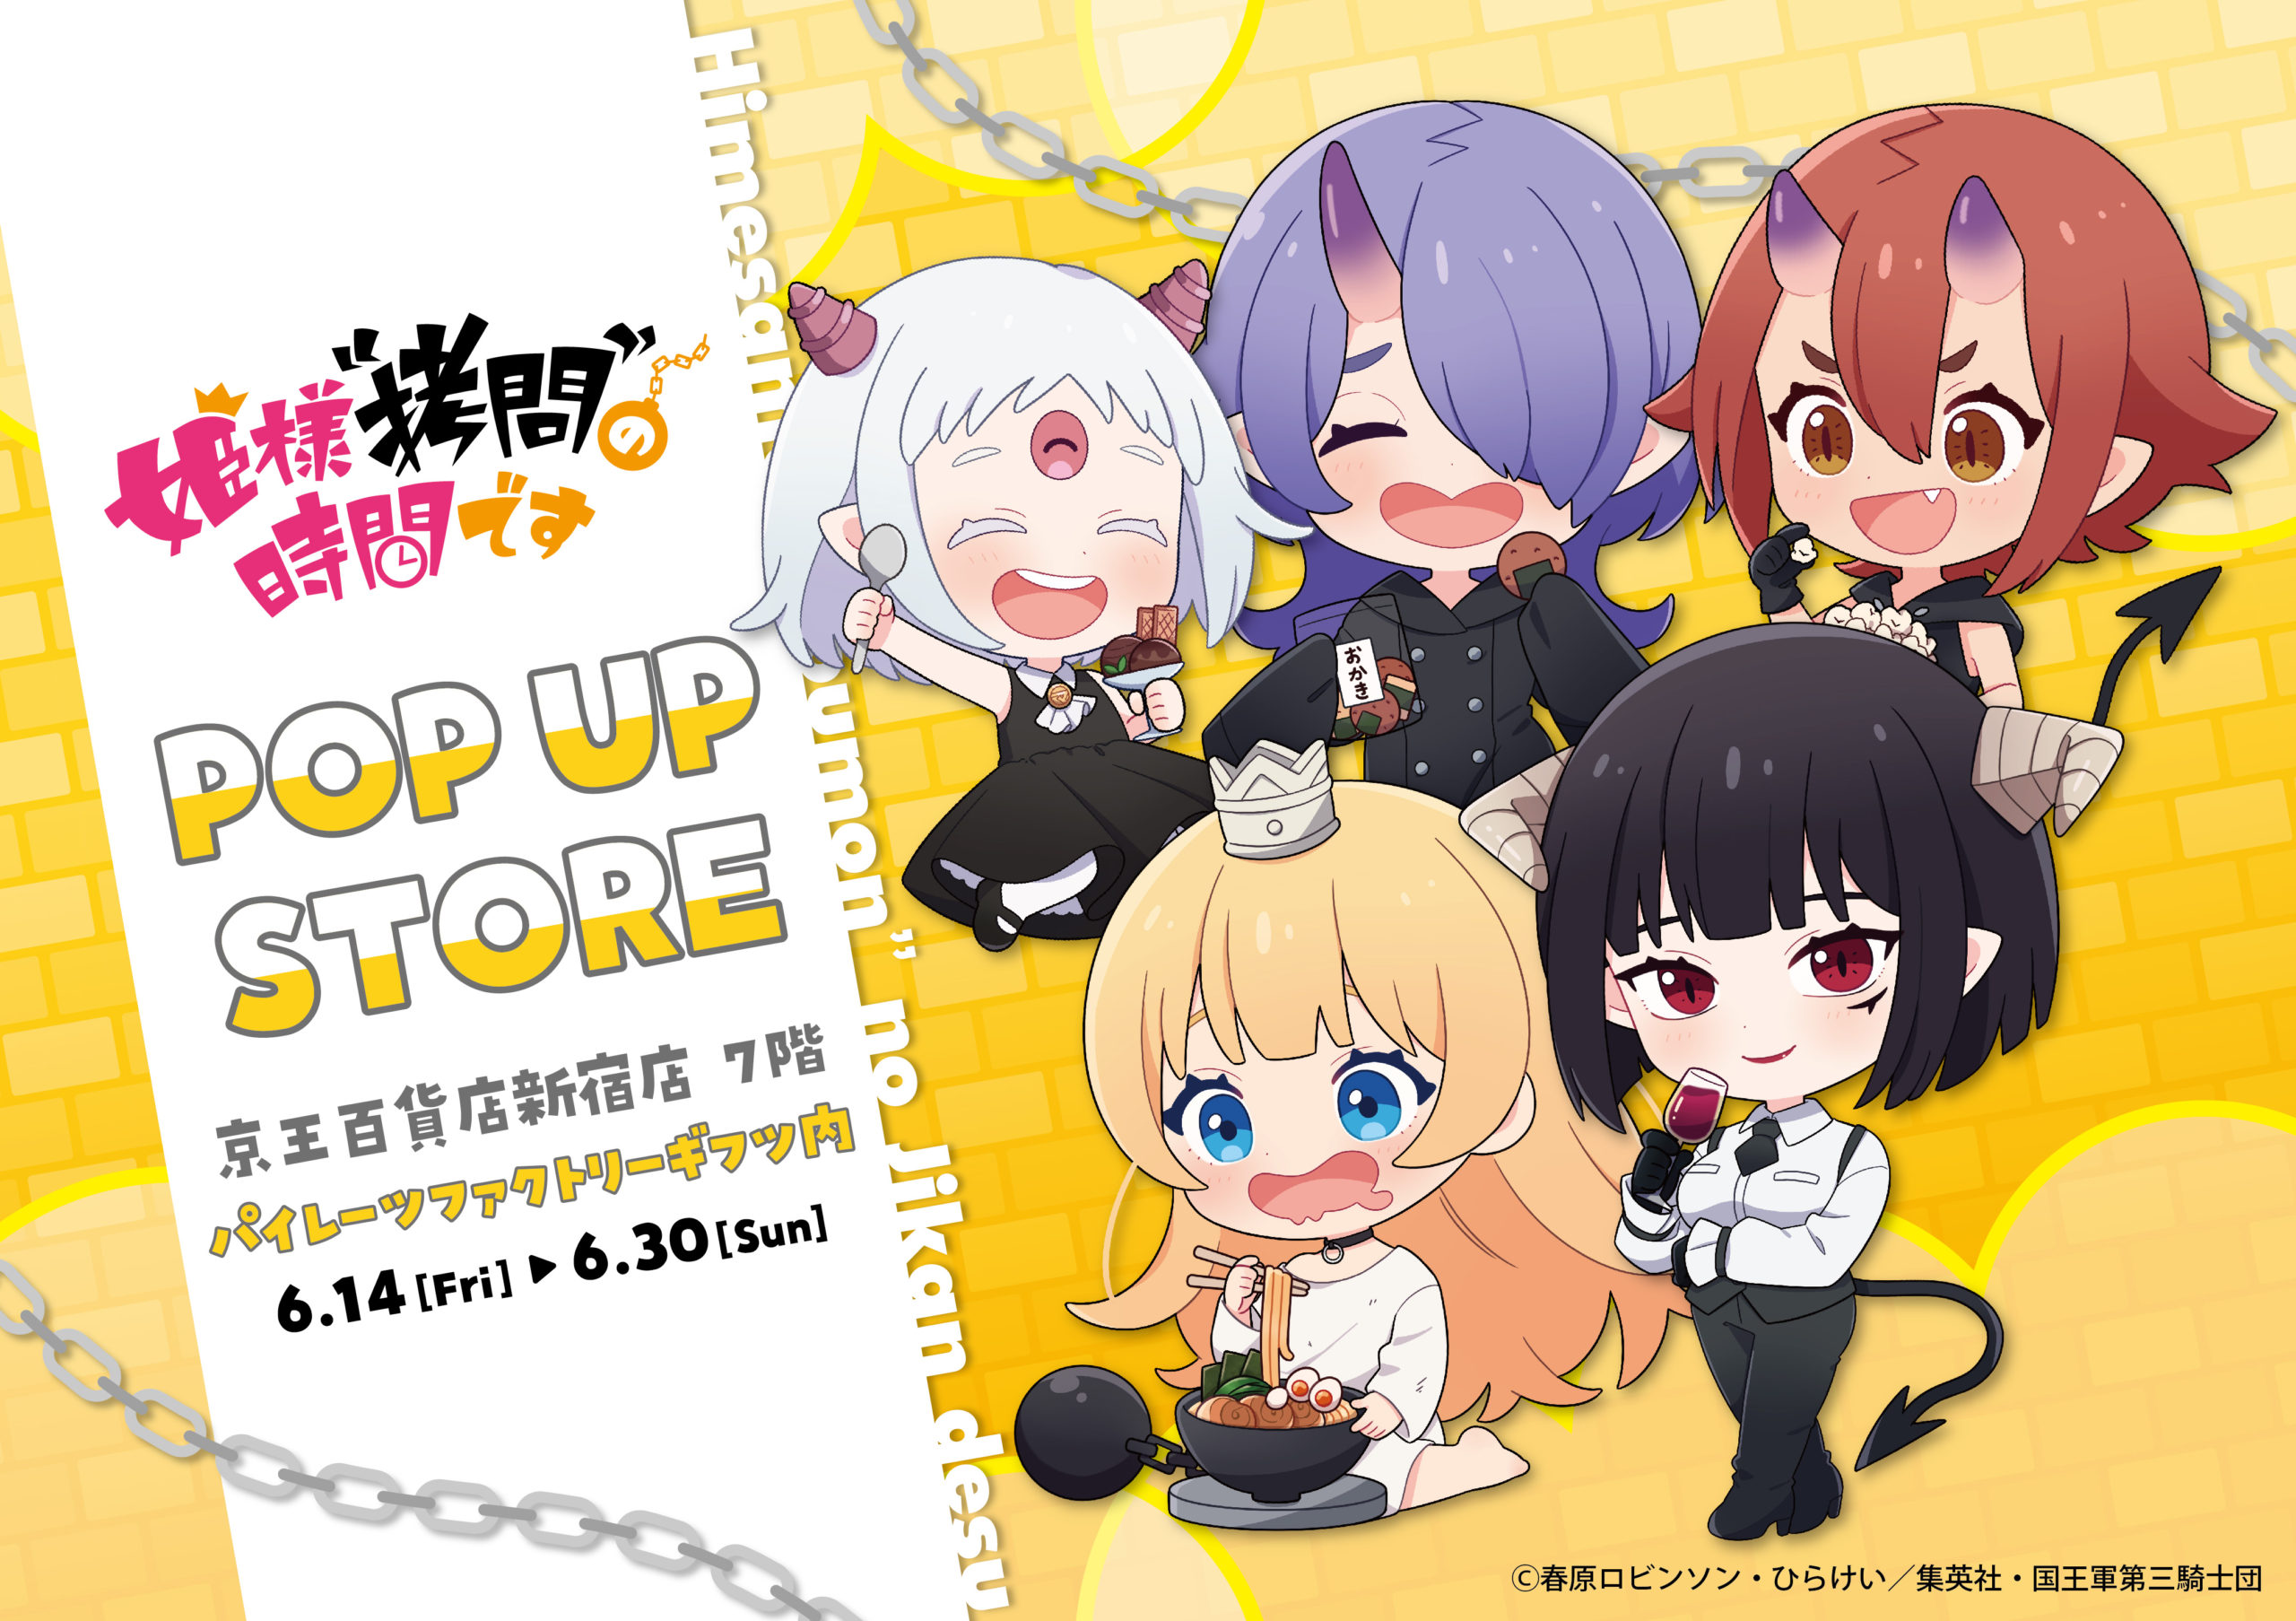 TVアニメ『姫様“拷問”の時間です』 POP UP STORE in 京王百貨店新宿店